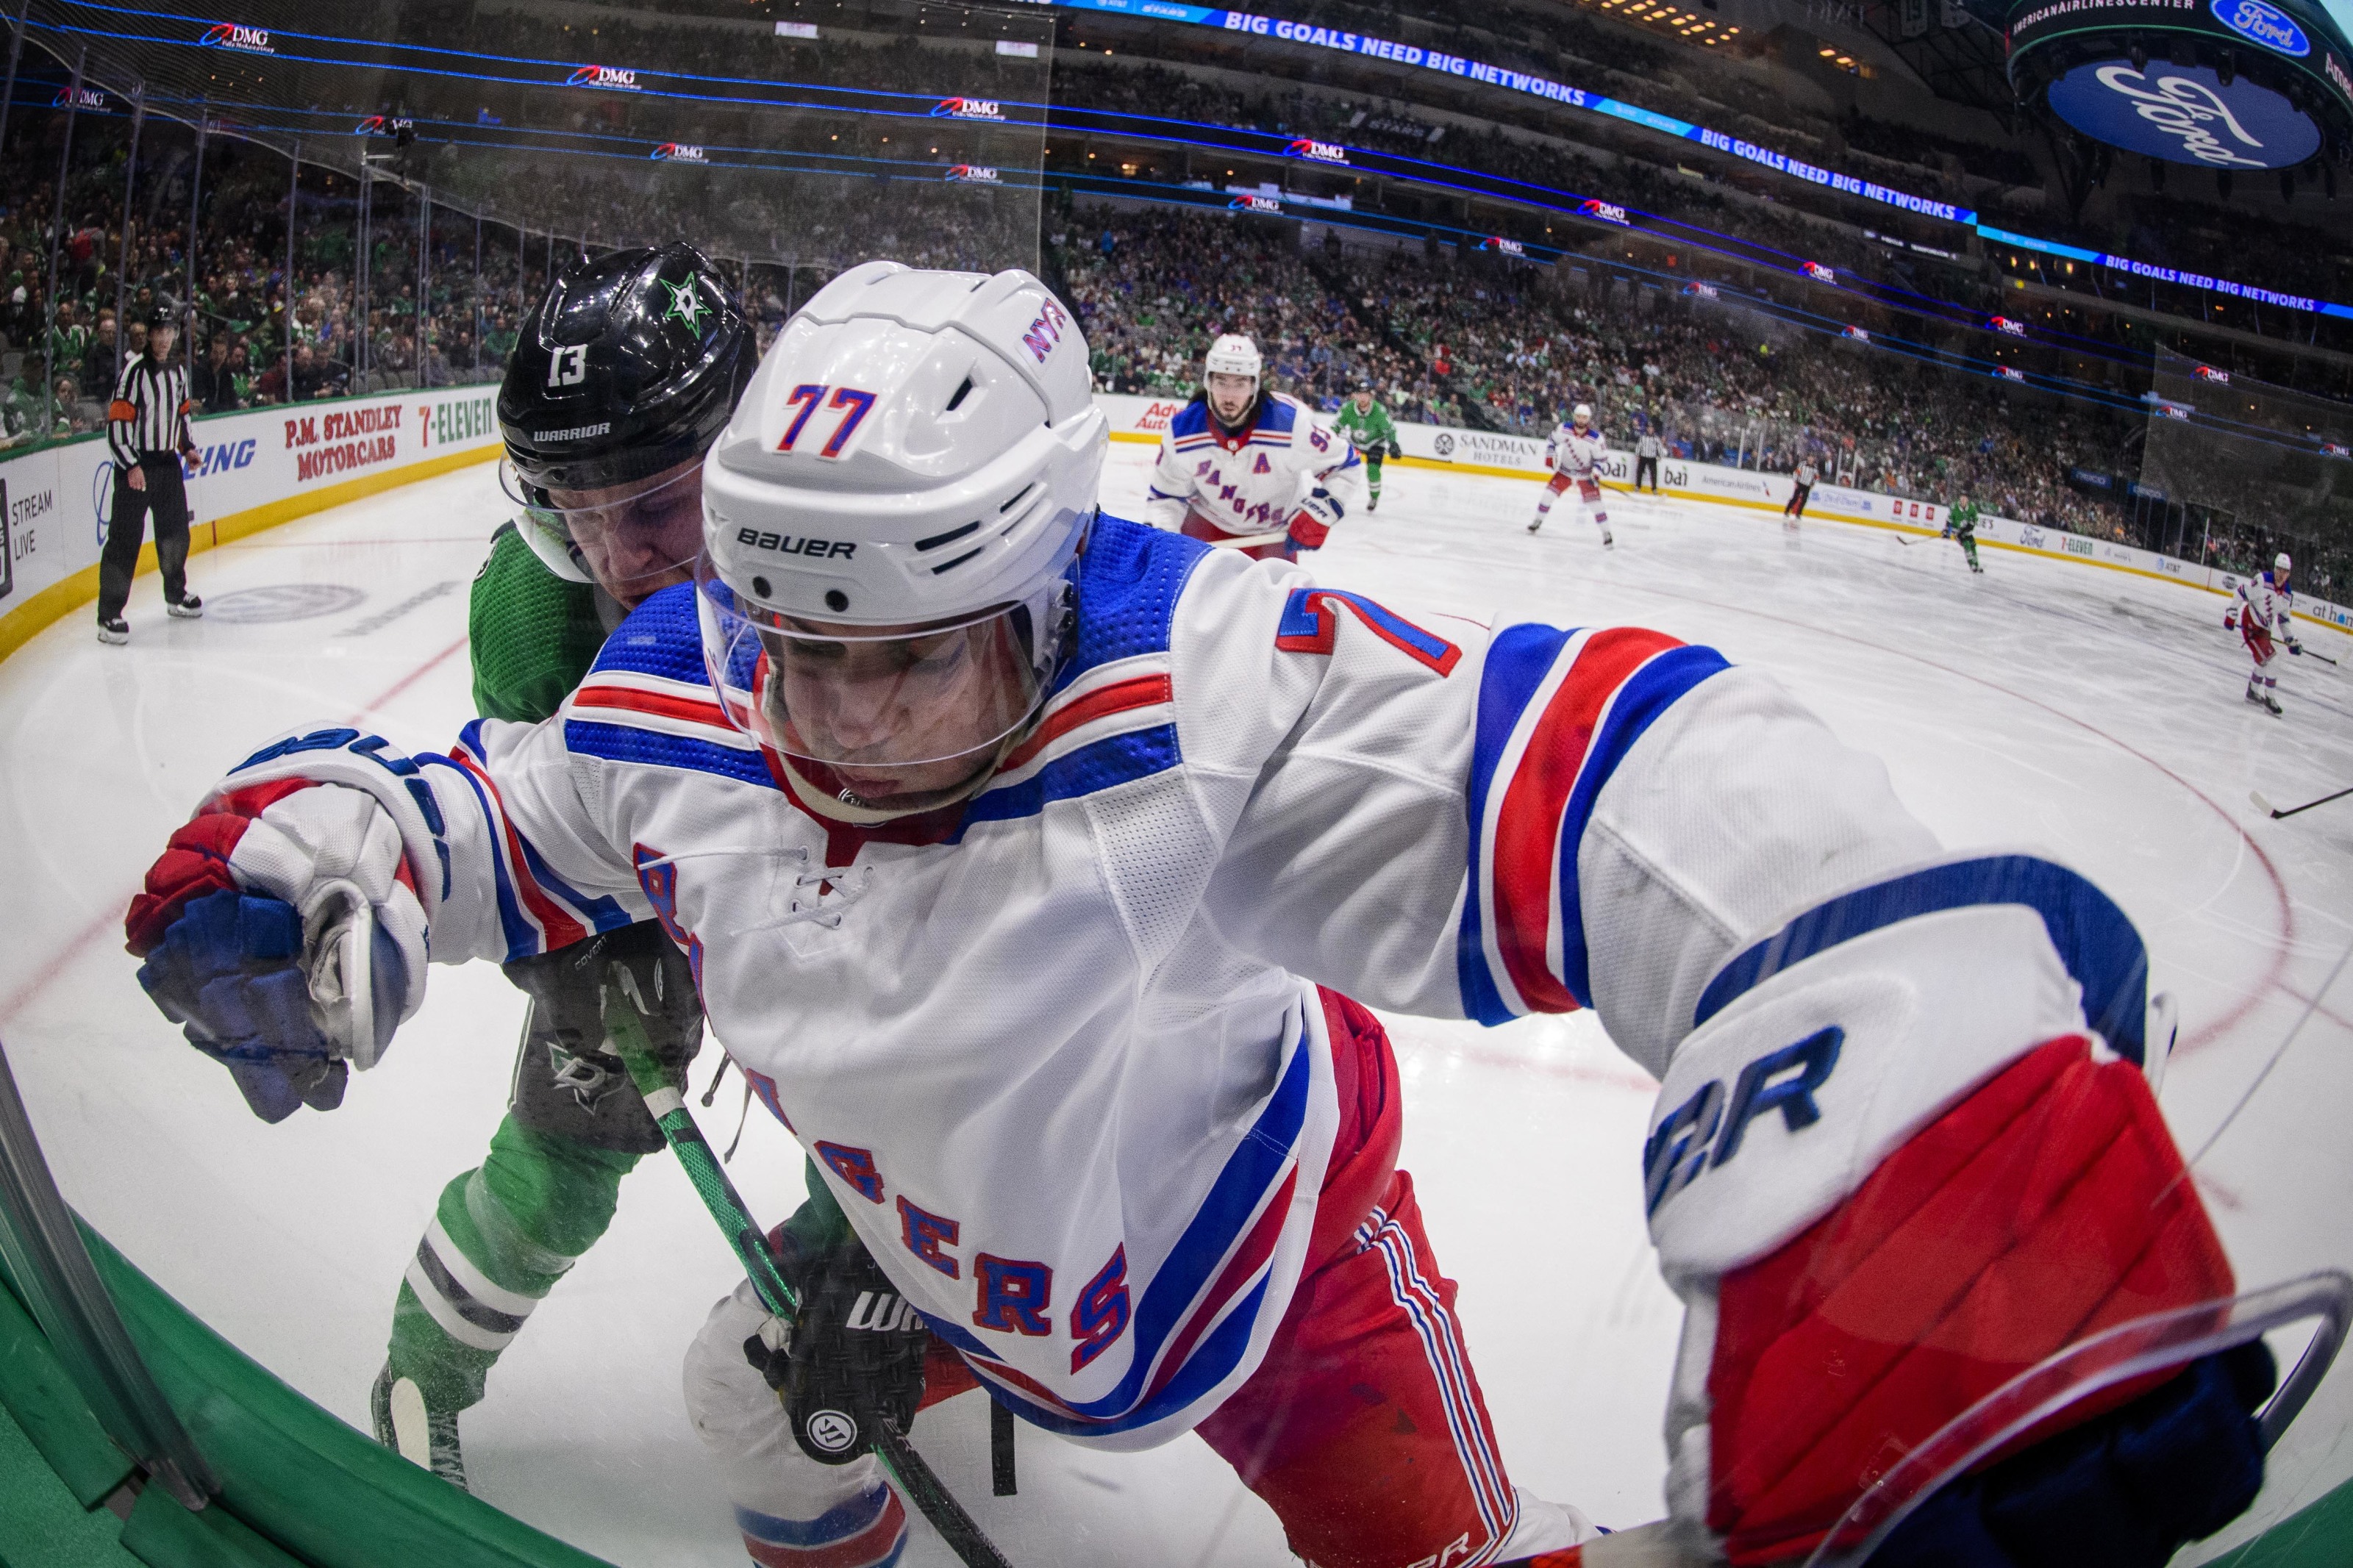 New York Rangers D Tony DeAngelo clears waivers after reported altercation  